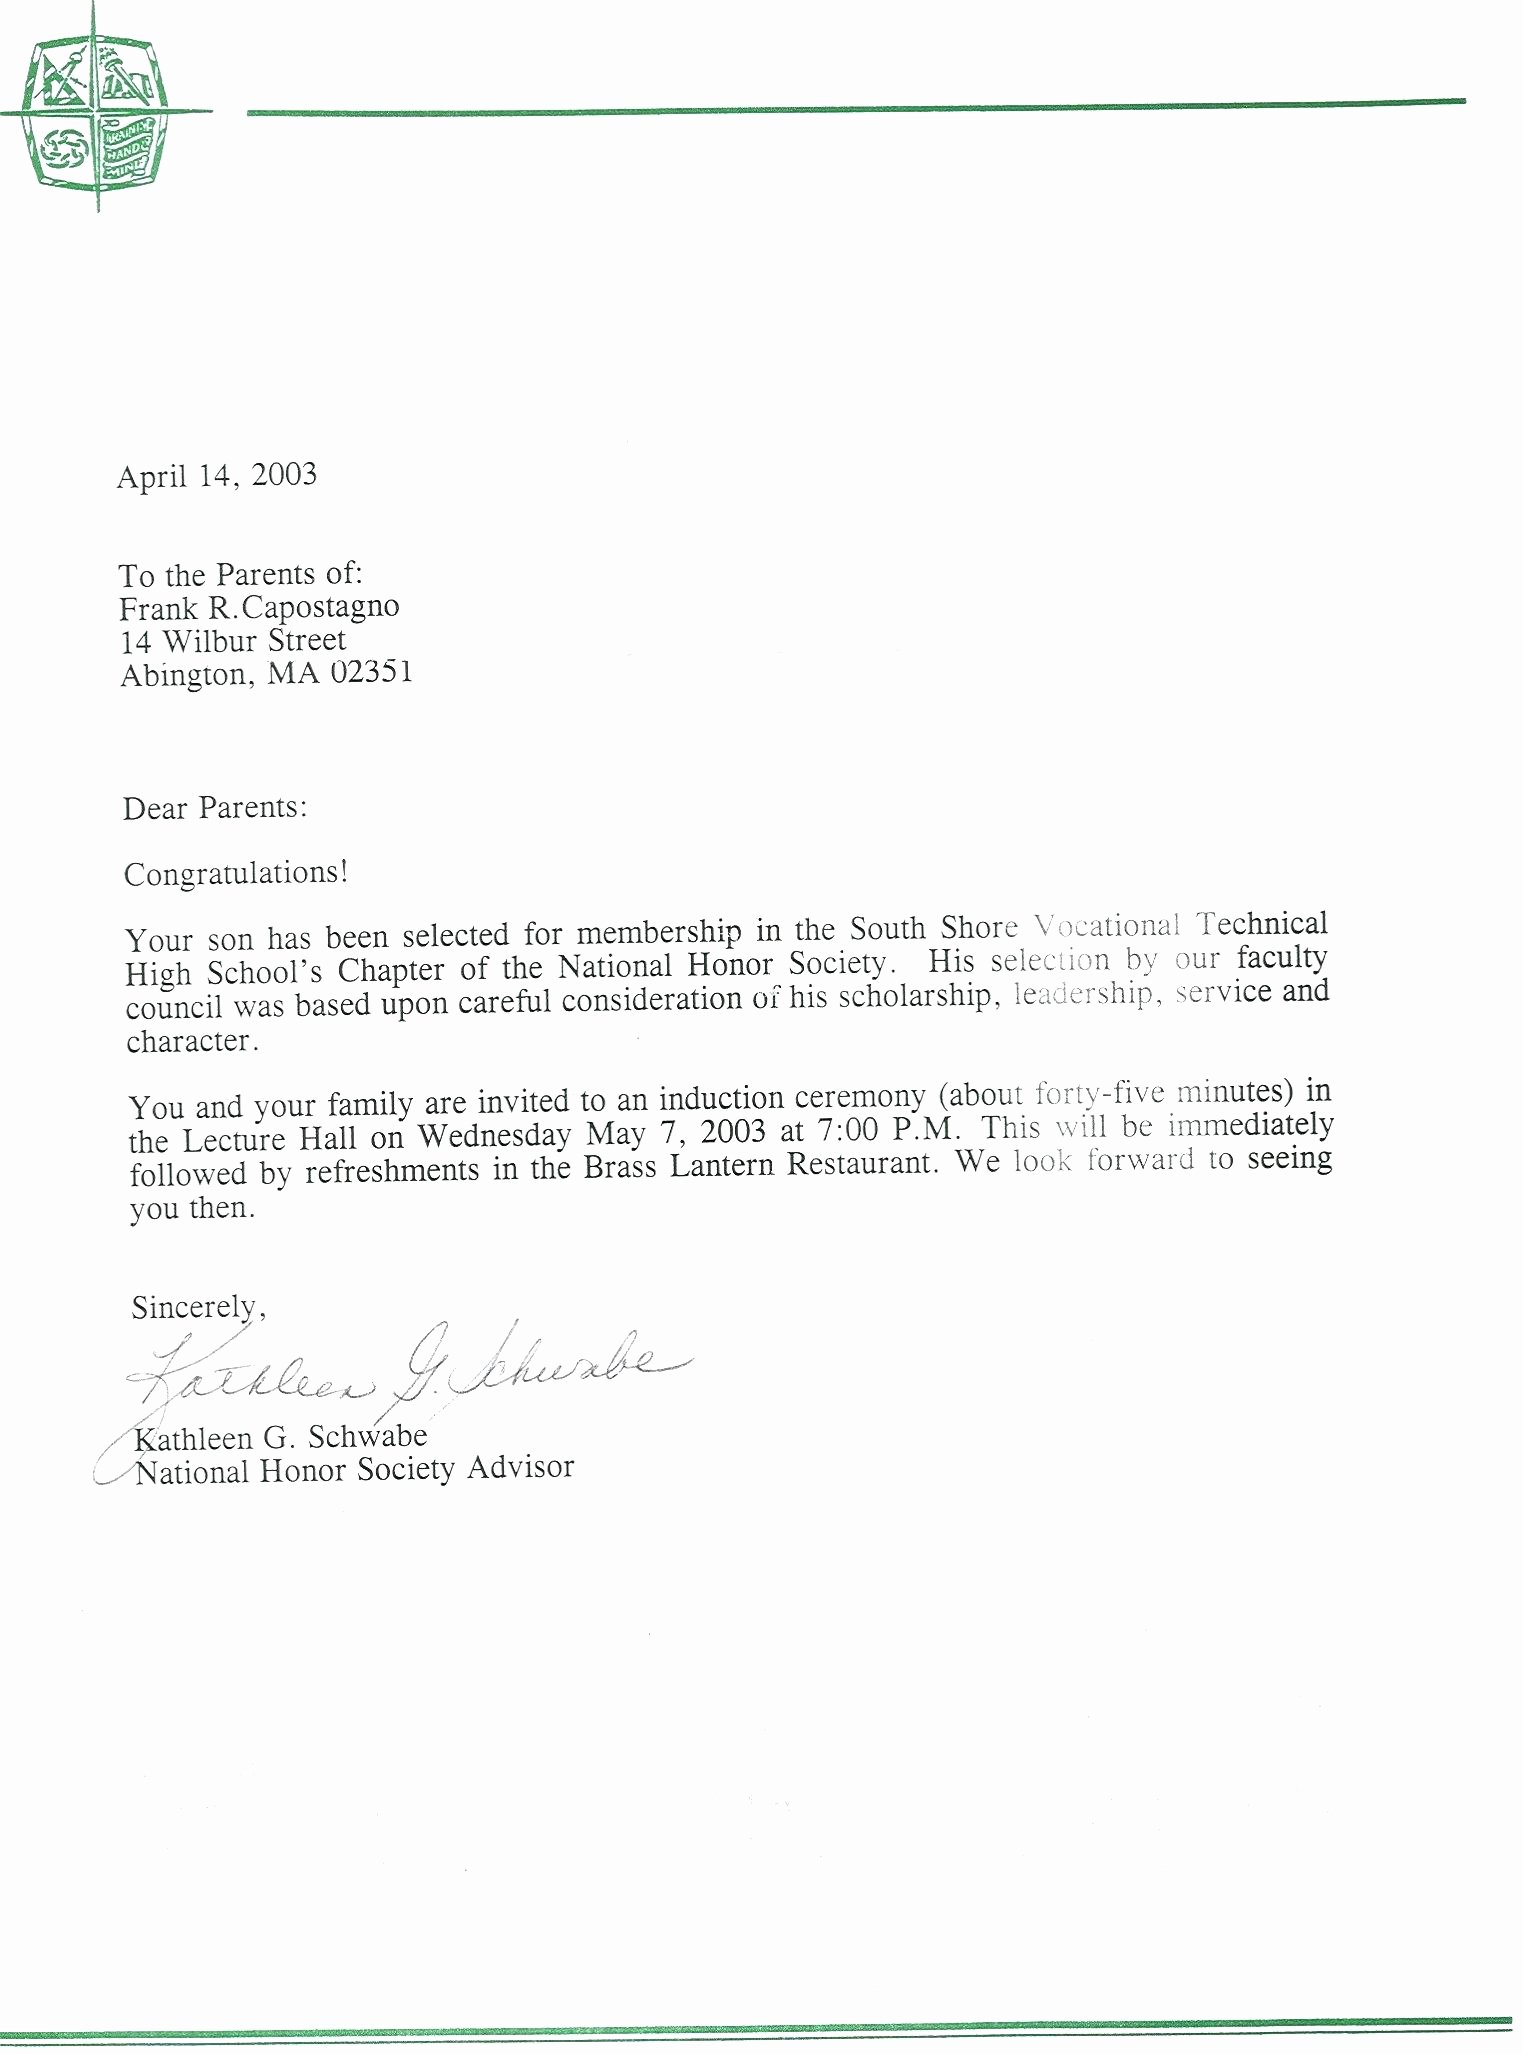 Nhs Letter Of Recommendation Template Best Of 17 National Junior Honor society Letter Re Mendation